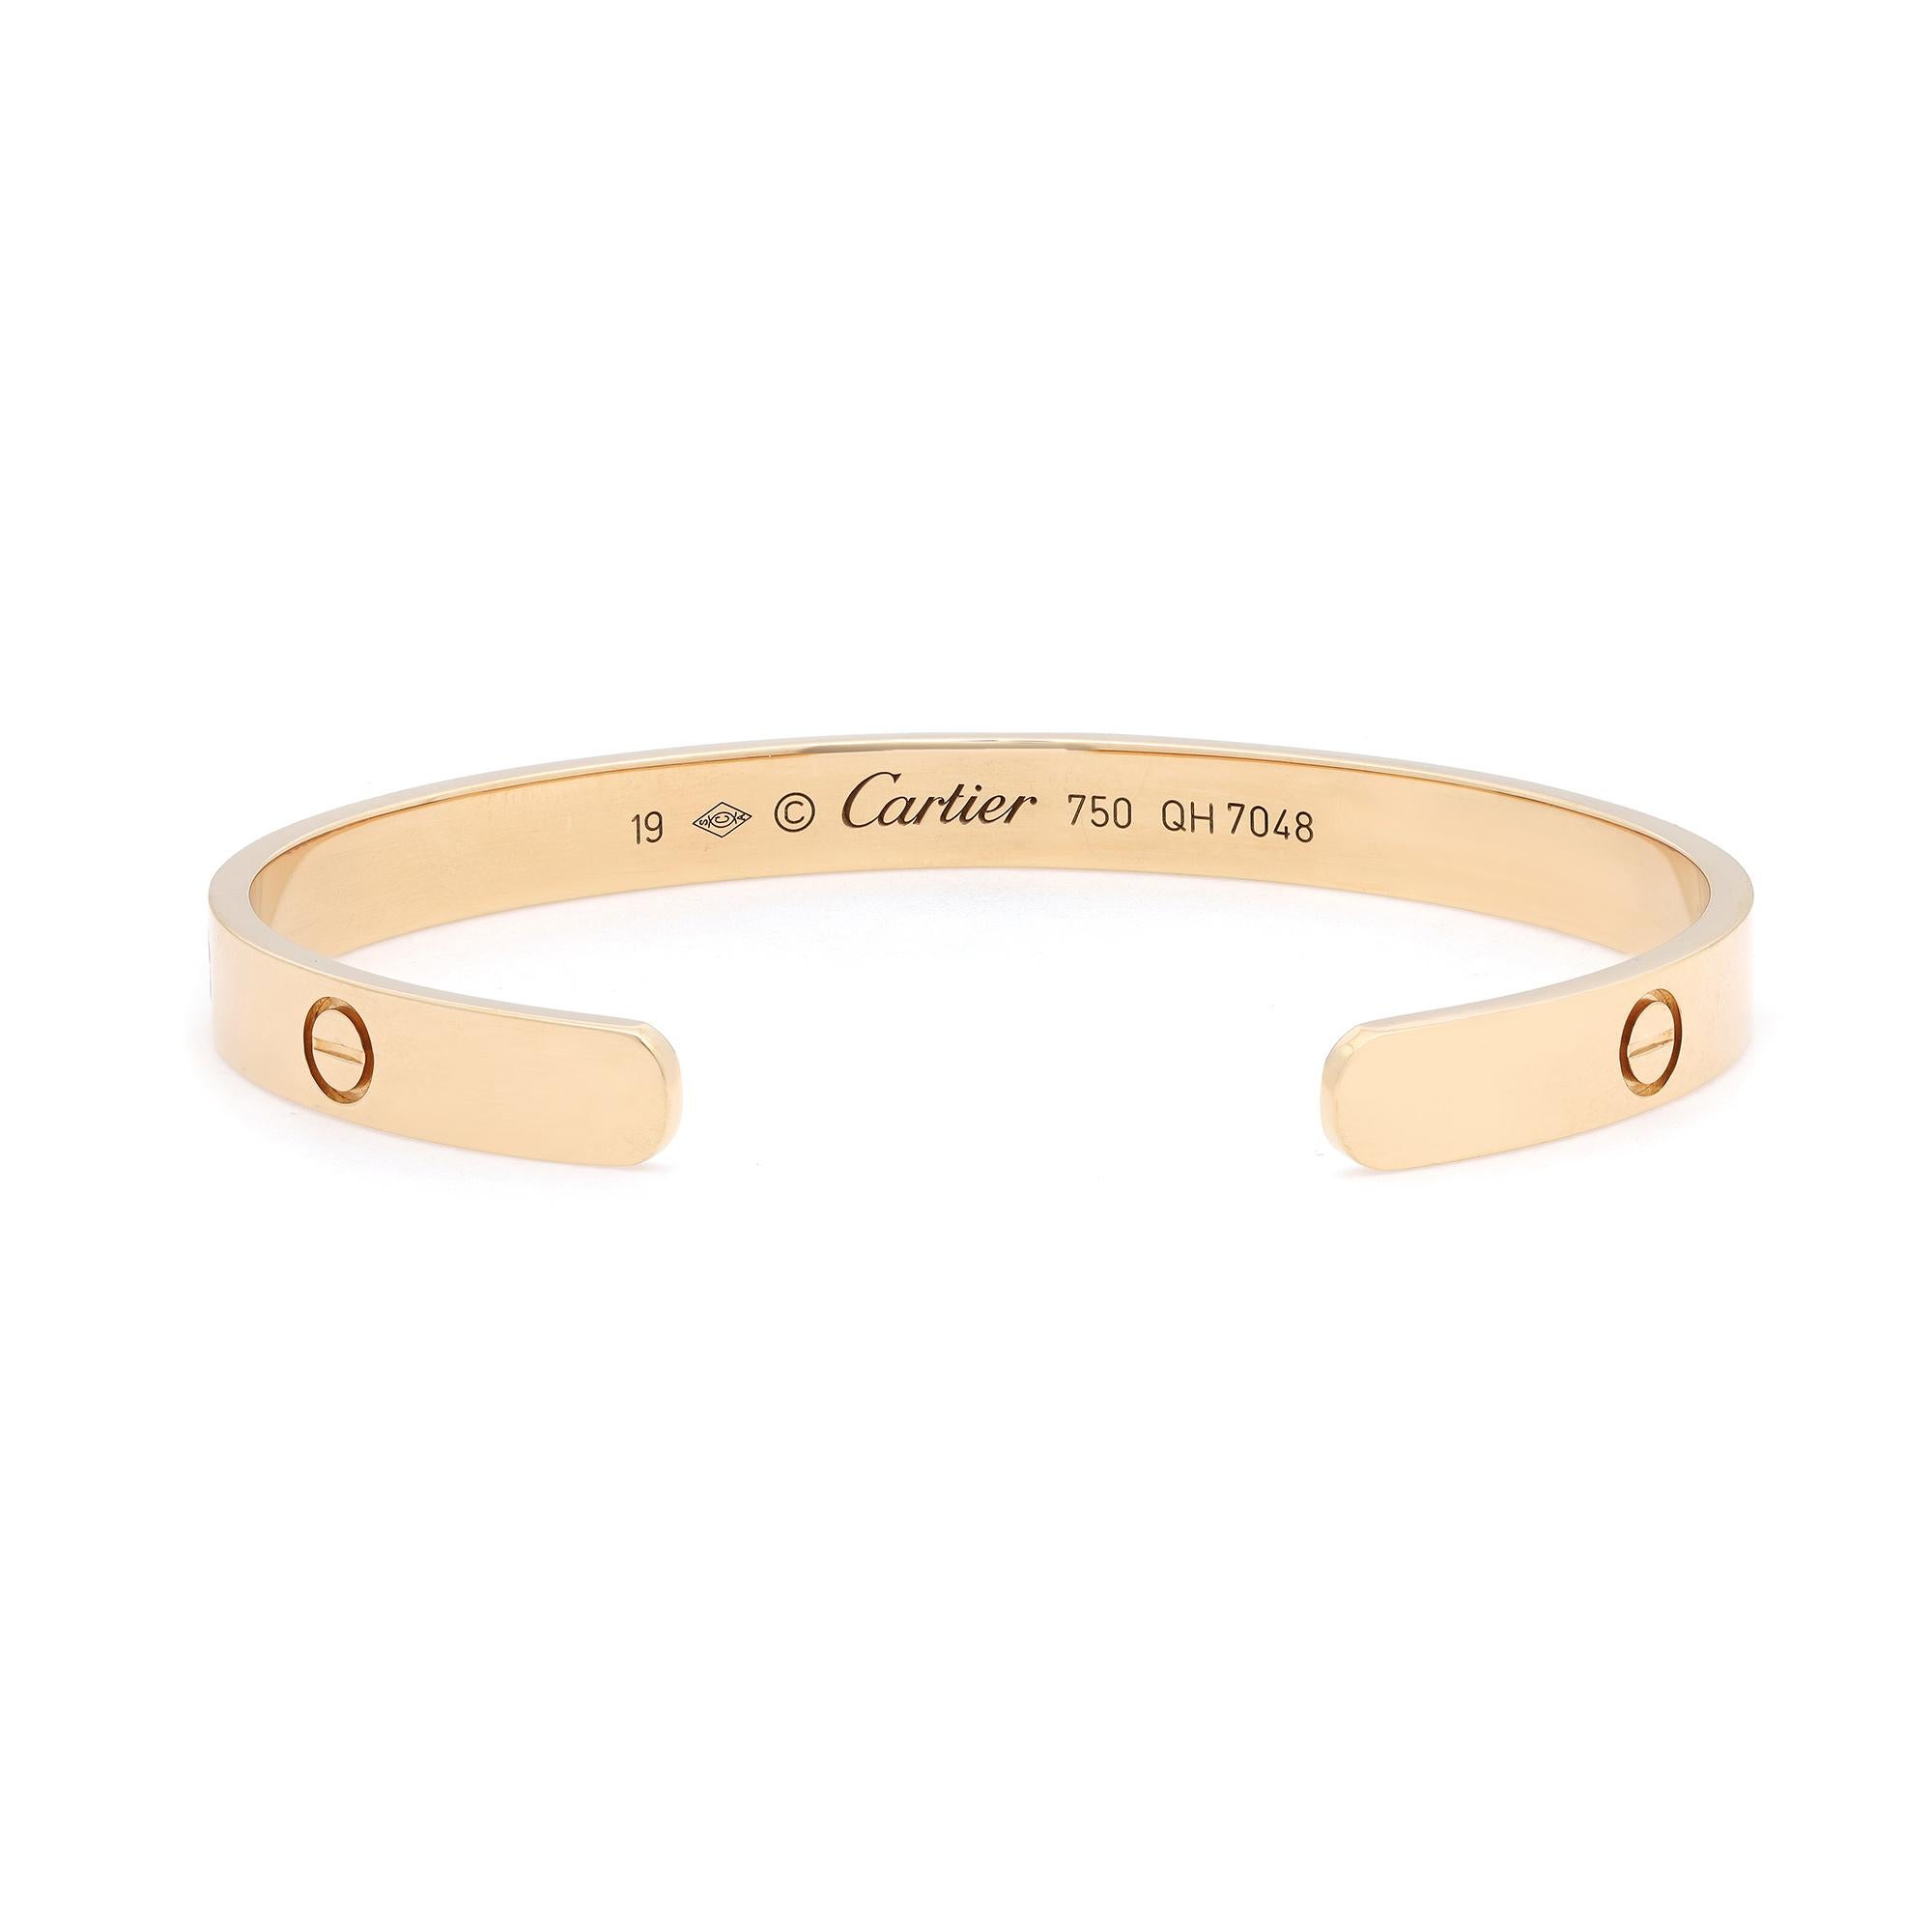 Cartier classic 18K yellow gold Love open style bracelet bangle in size 19. Width: 6.1mm. Excellent pre-owned condition. Looks unworn. Original box and paper are not included.